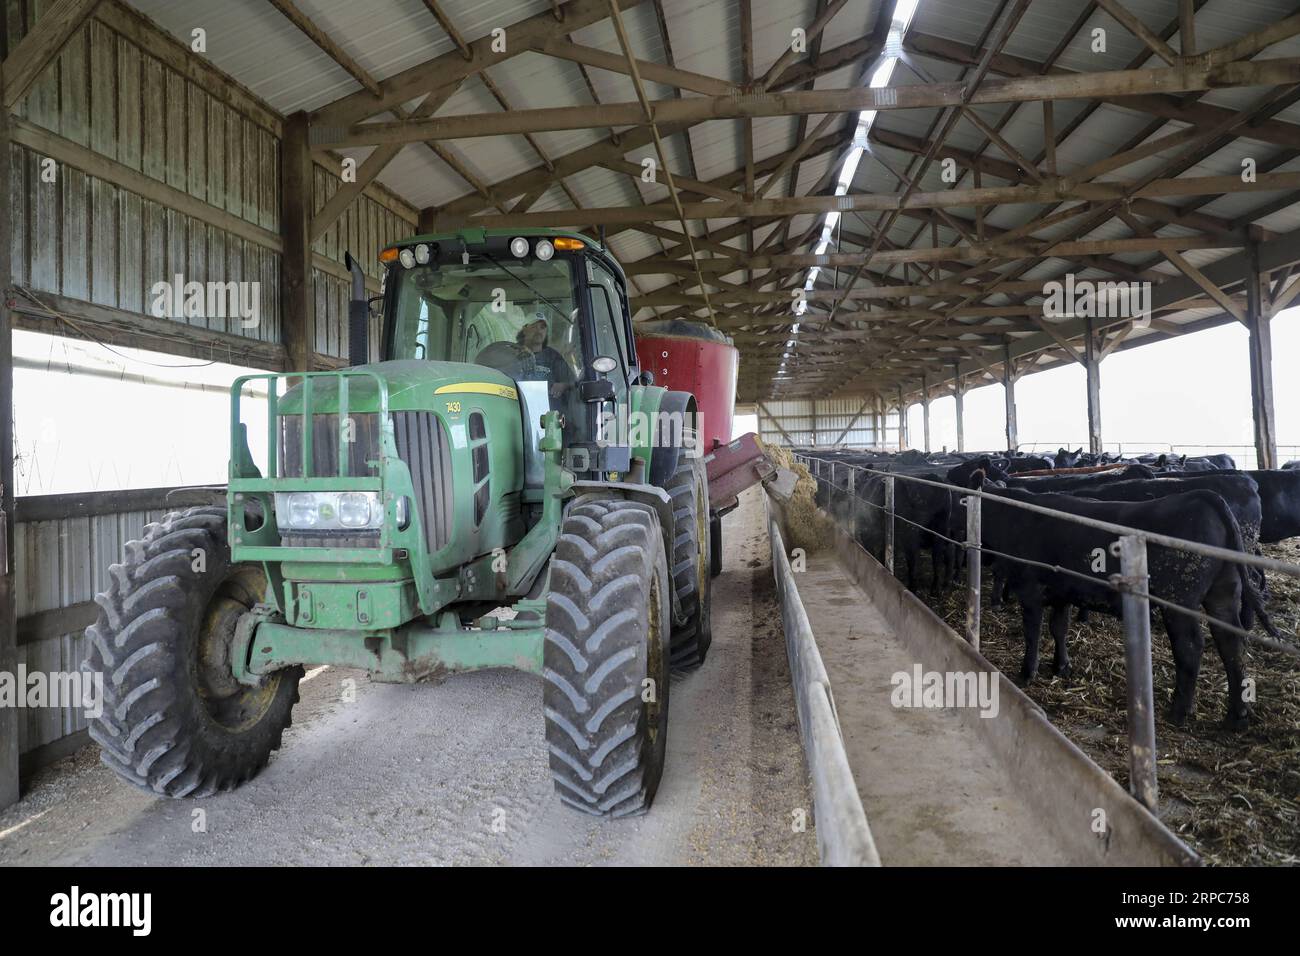 (190626) -- ATLANTIC, June 26, 2019 -- Bret Pellett, son of farm owner Bill Pellett, adds feeds for cattle at their family farm in Atlantic, a small city in the Midwestern state of Iowa, the United States, June 18, 2019. From cattle feeders in Iowa to pecan growers in Georgia, U.S. farmers are worrying about further damage caused by market uncertainties as trade tensions between the world s two largest economies drag on. TO GO WITH Feature: U.S. farmers frustrated by damage caused by tariff uncertainties ) U.S.-ATLANTIC-AGRICULTURE-CHINA TRADE WangxYing PUBLICATIONxNOTxINxCHN Stock Photo